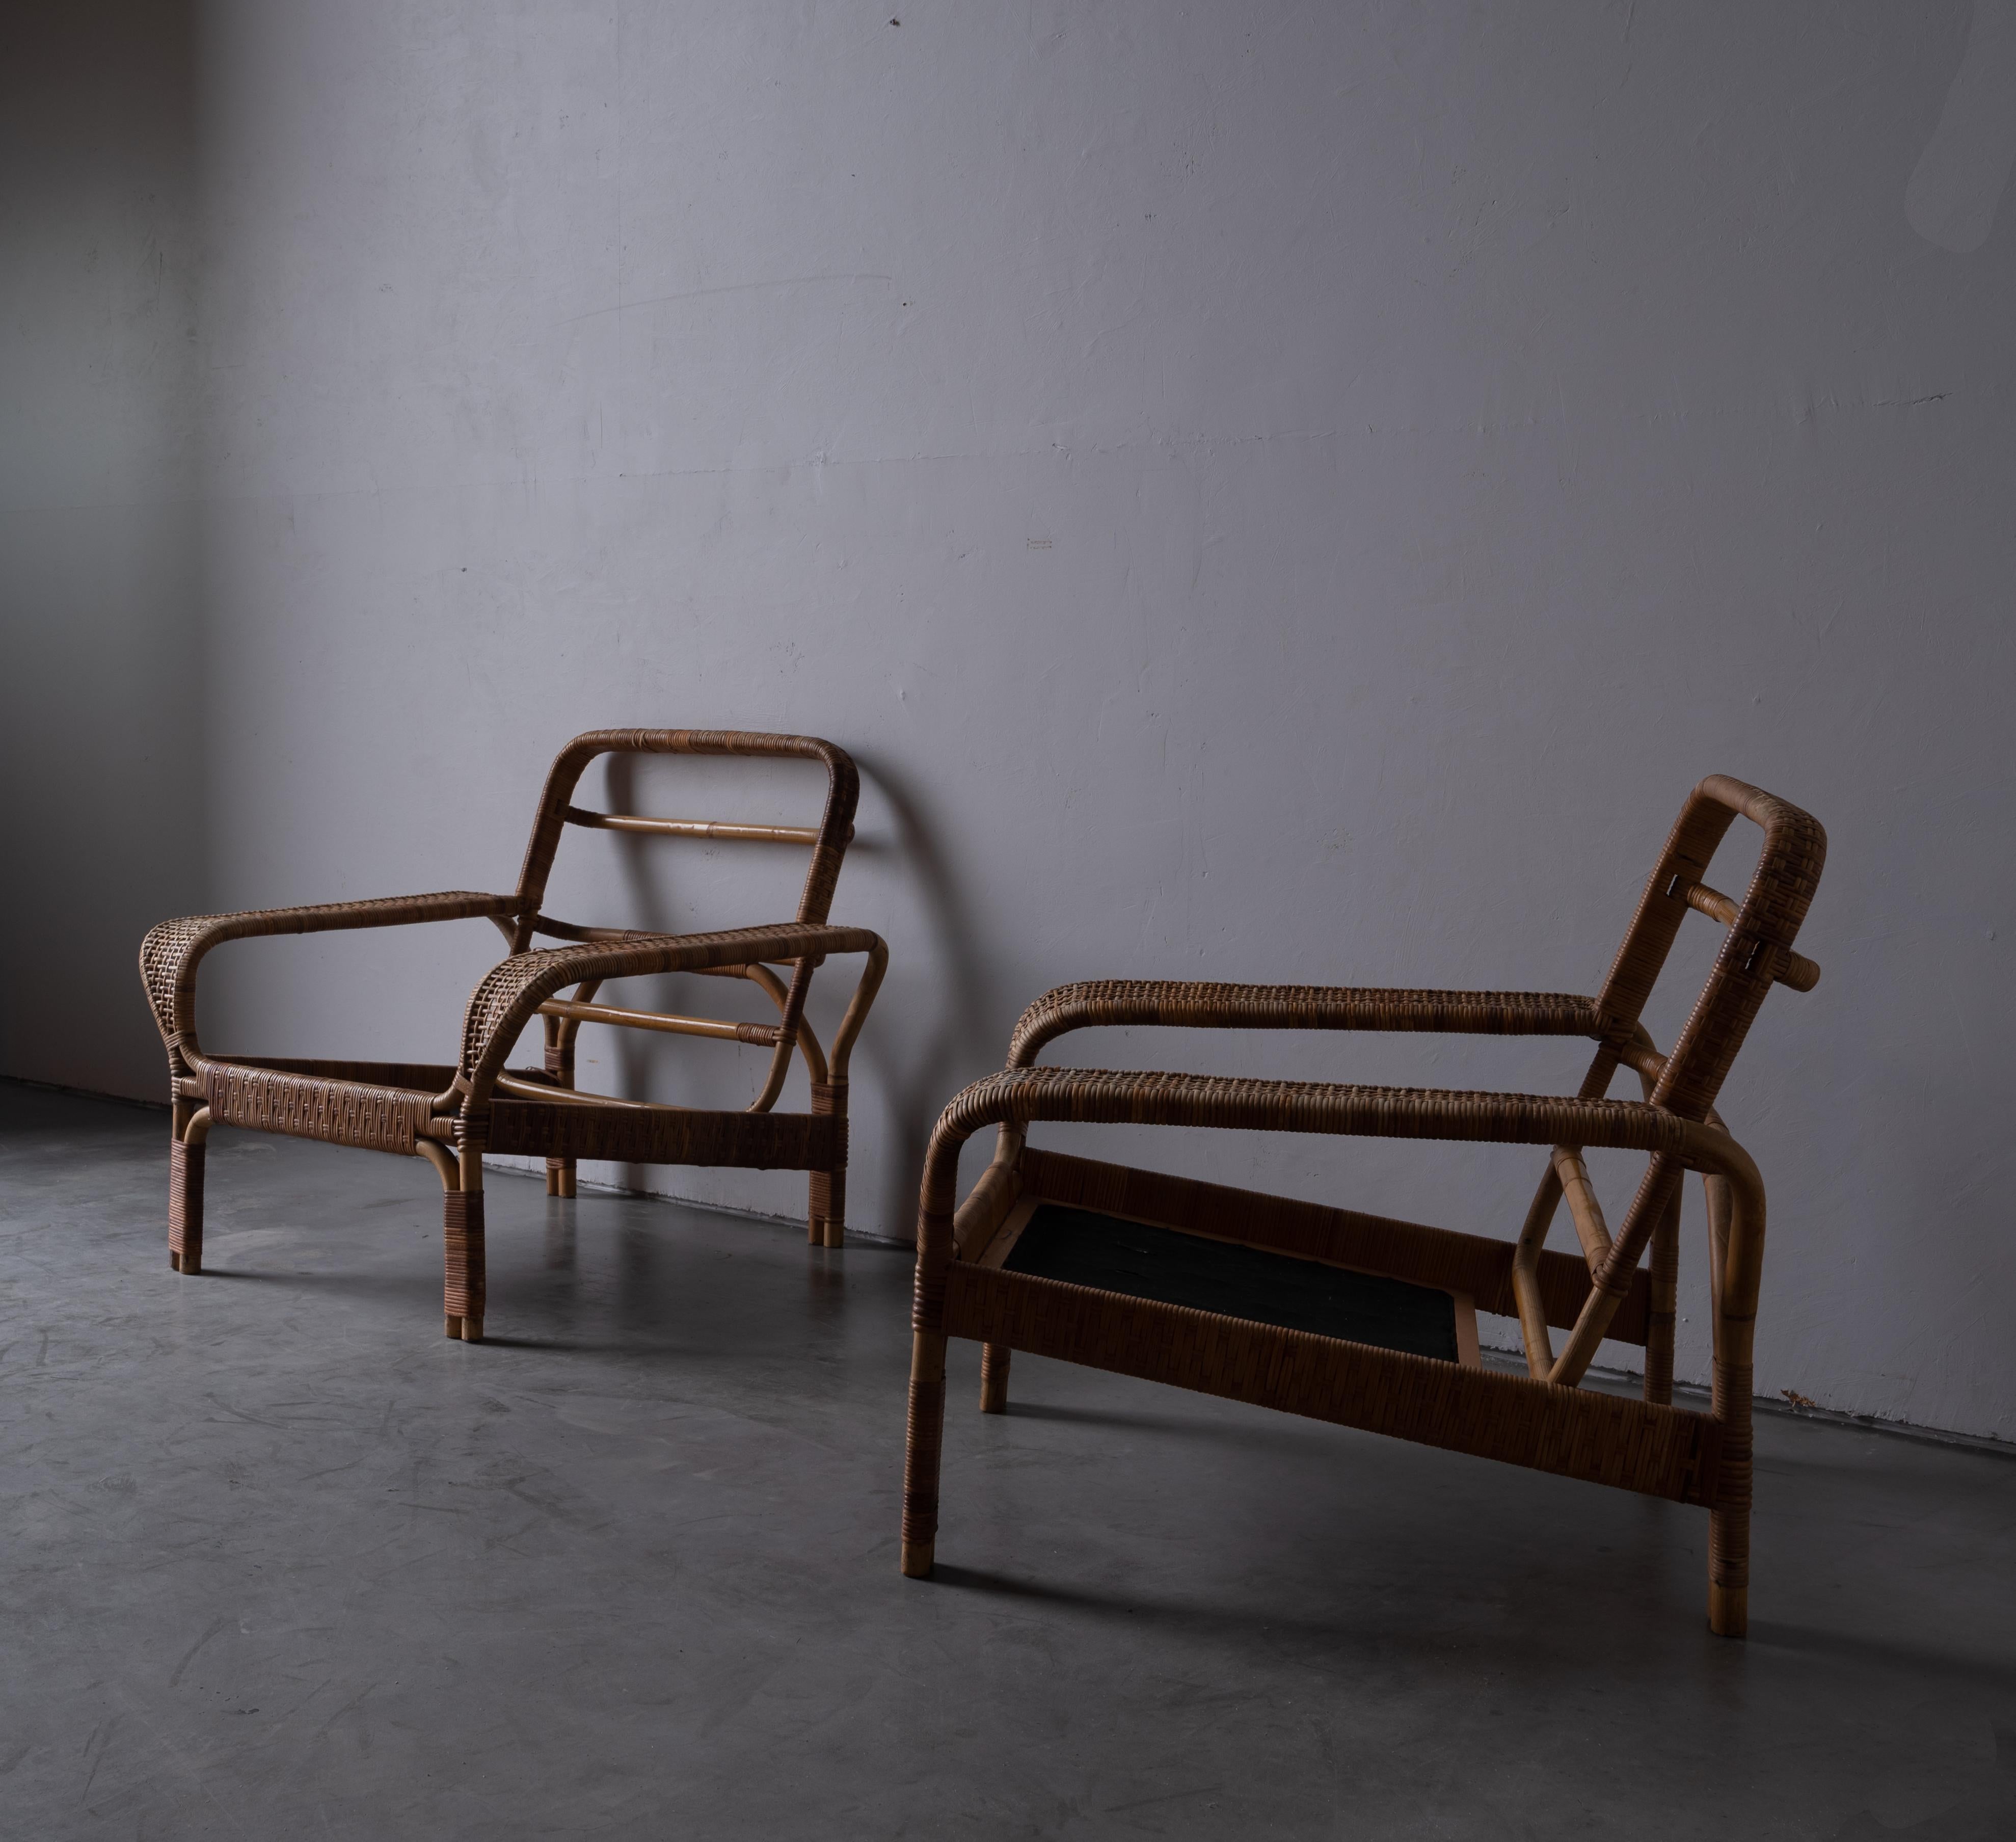 A pair of lounge chairs. Designed and produced in Denmark. 1940s.

In moulded bamboo with rattan / cane details. Without seat cushions, will need custom made seat cushions.

Other designers of the period include Gio Ponti, Jean Royère, Henry